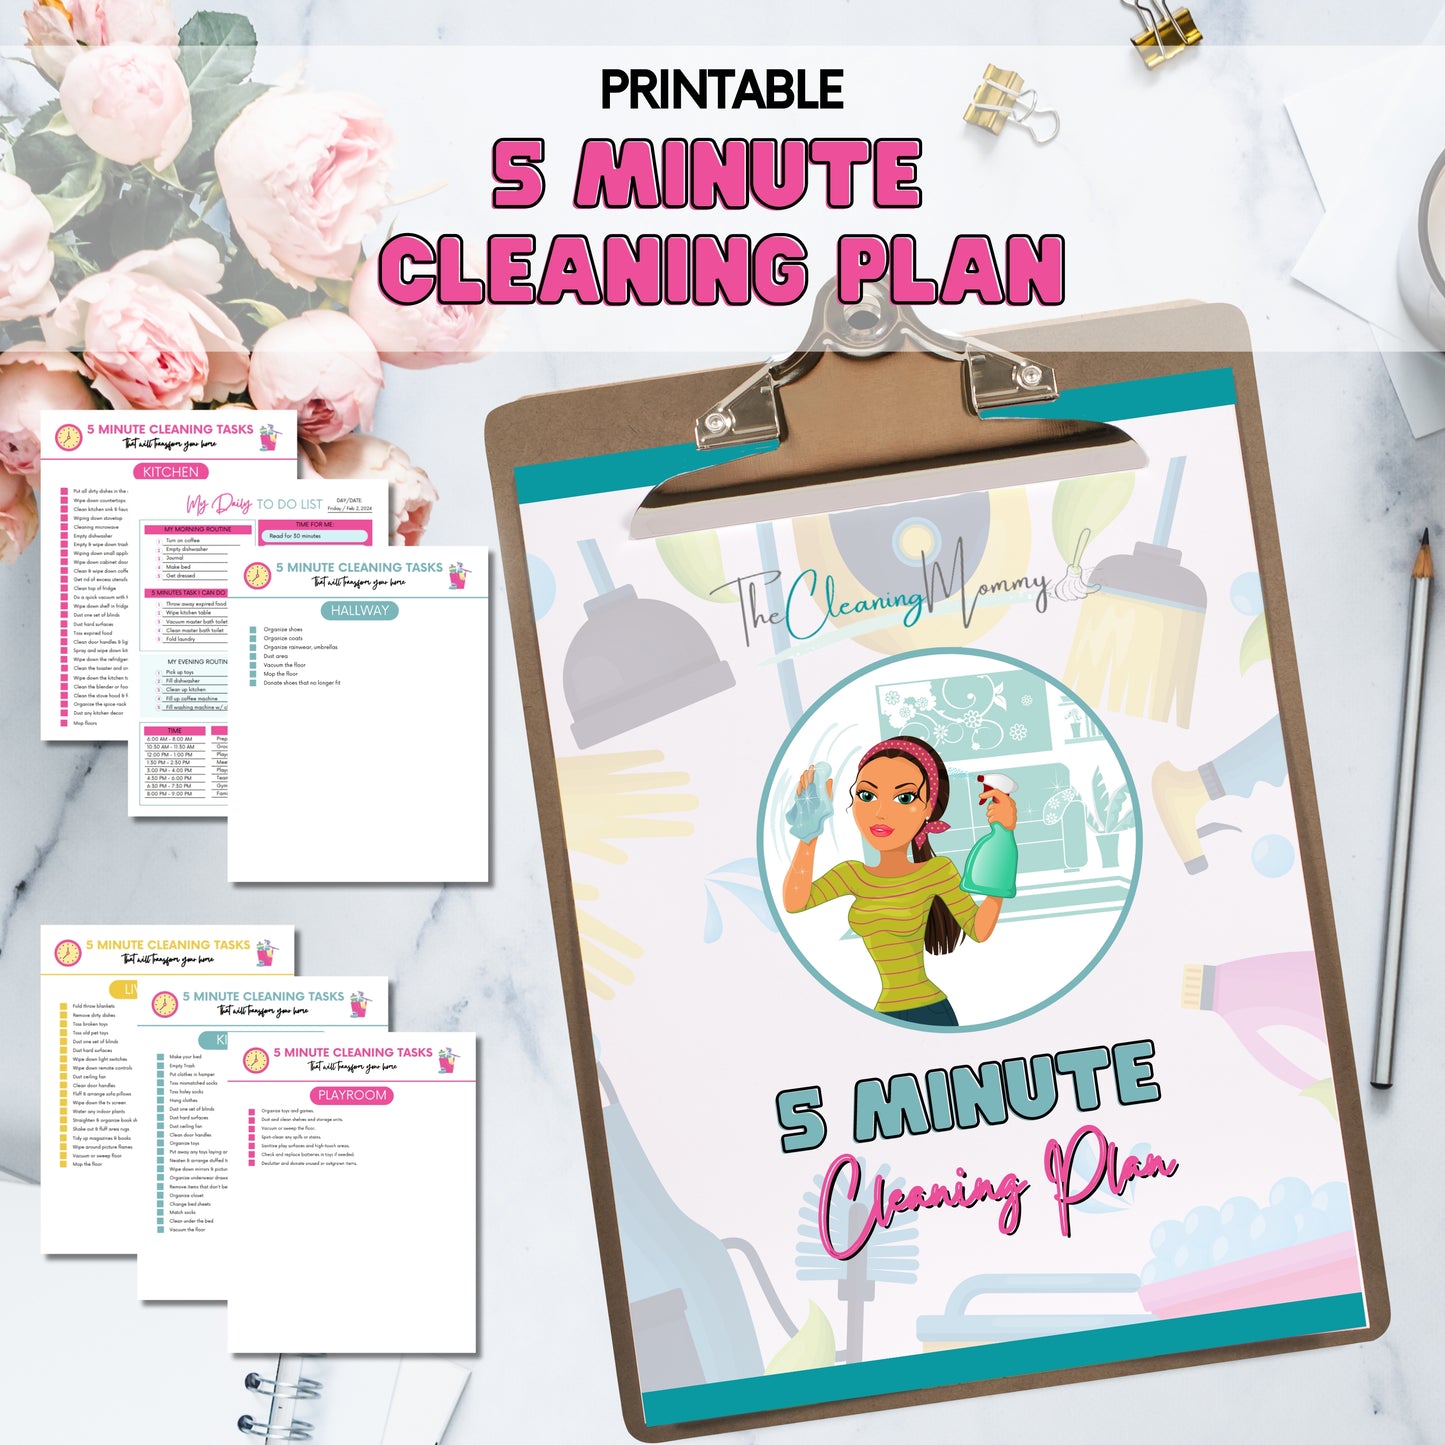 5 Minute Cleaning Plan